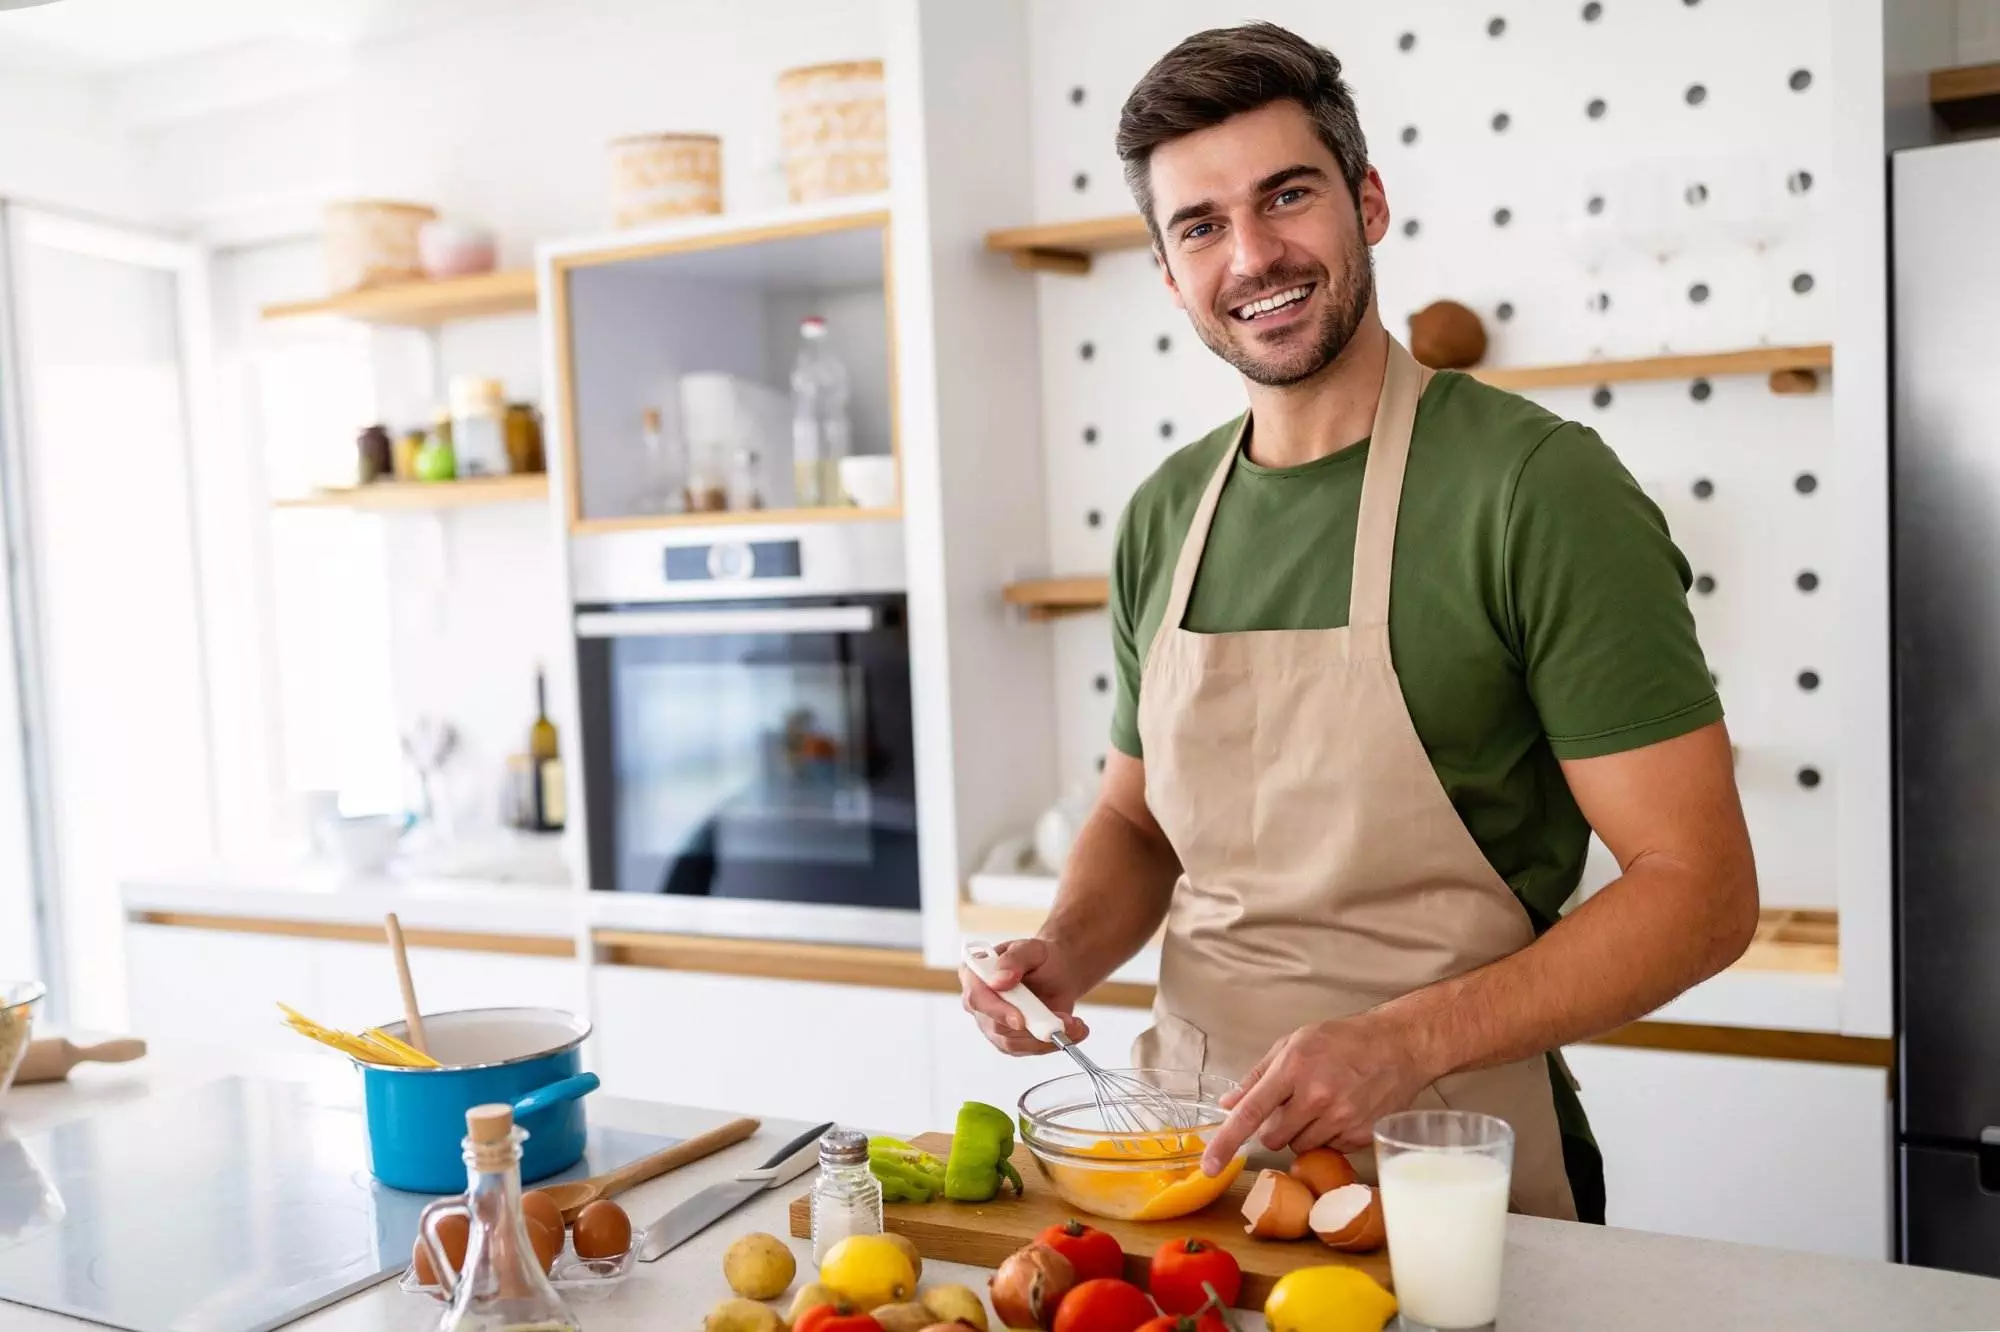 Man smiling while cooking in modern kitchen.